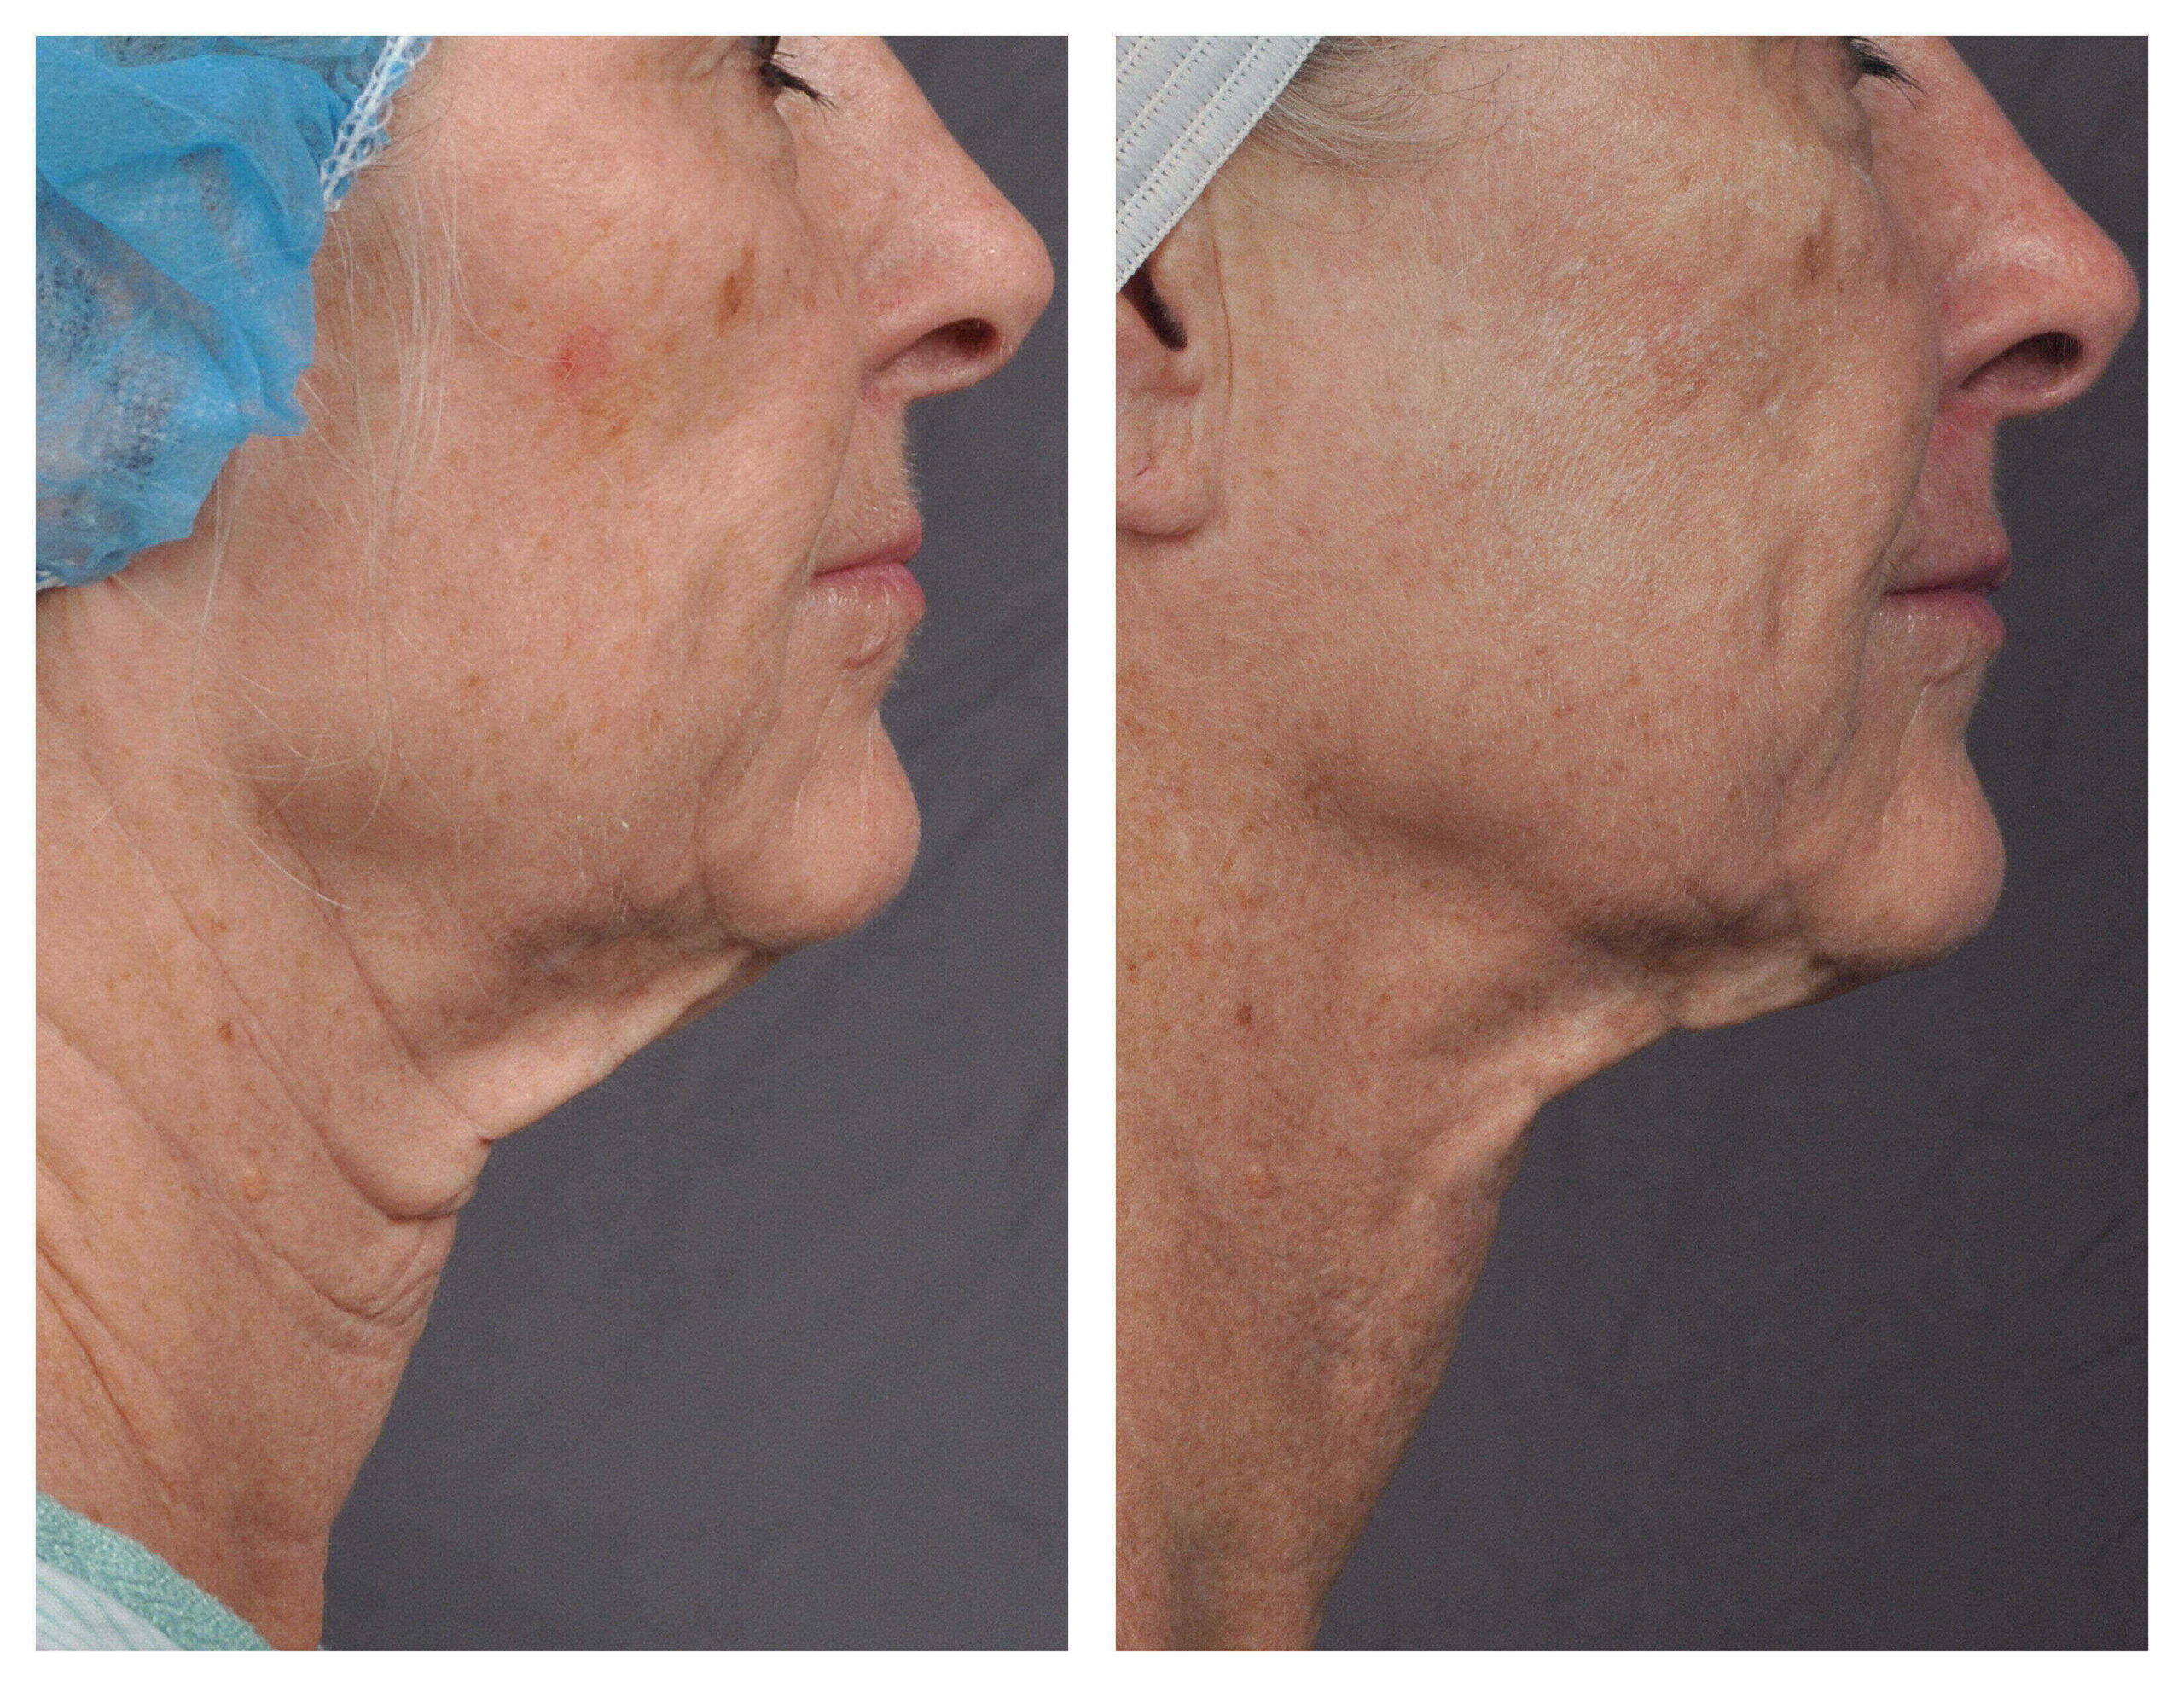 j-plasma before and after